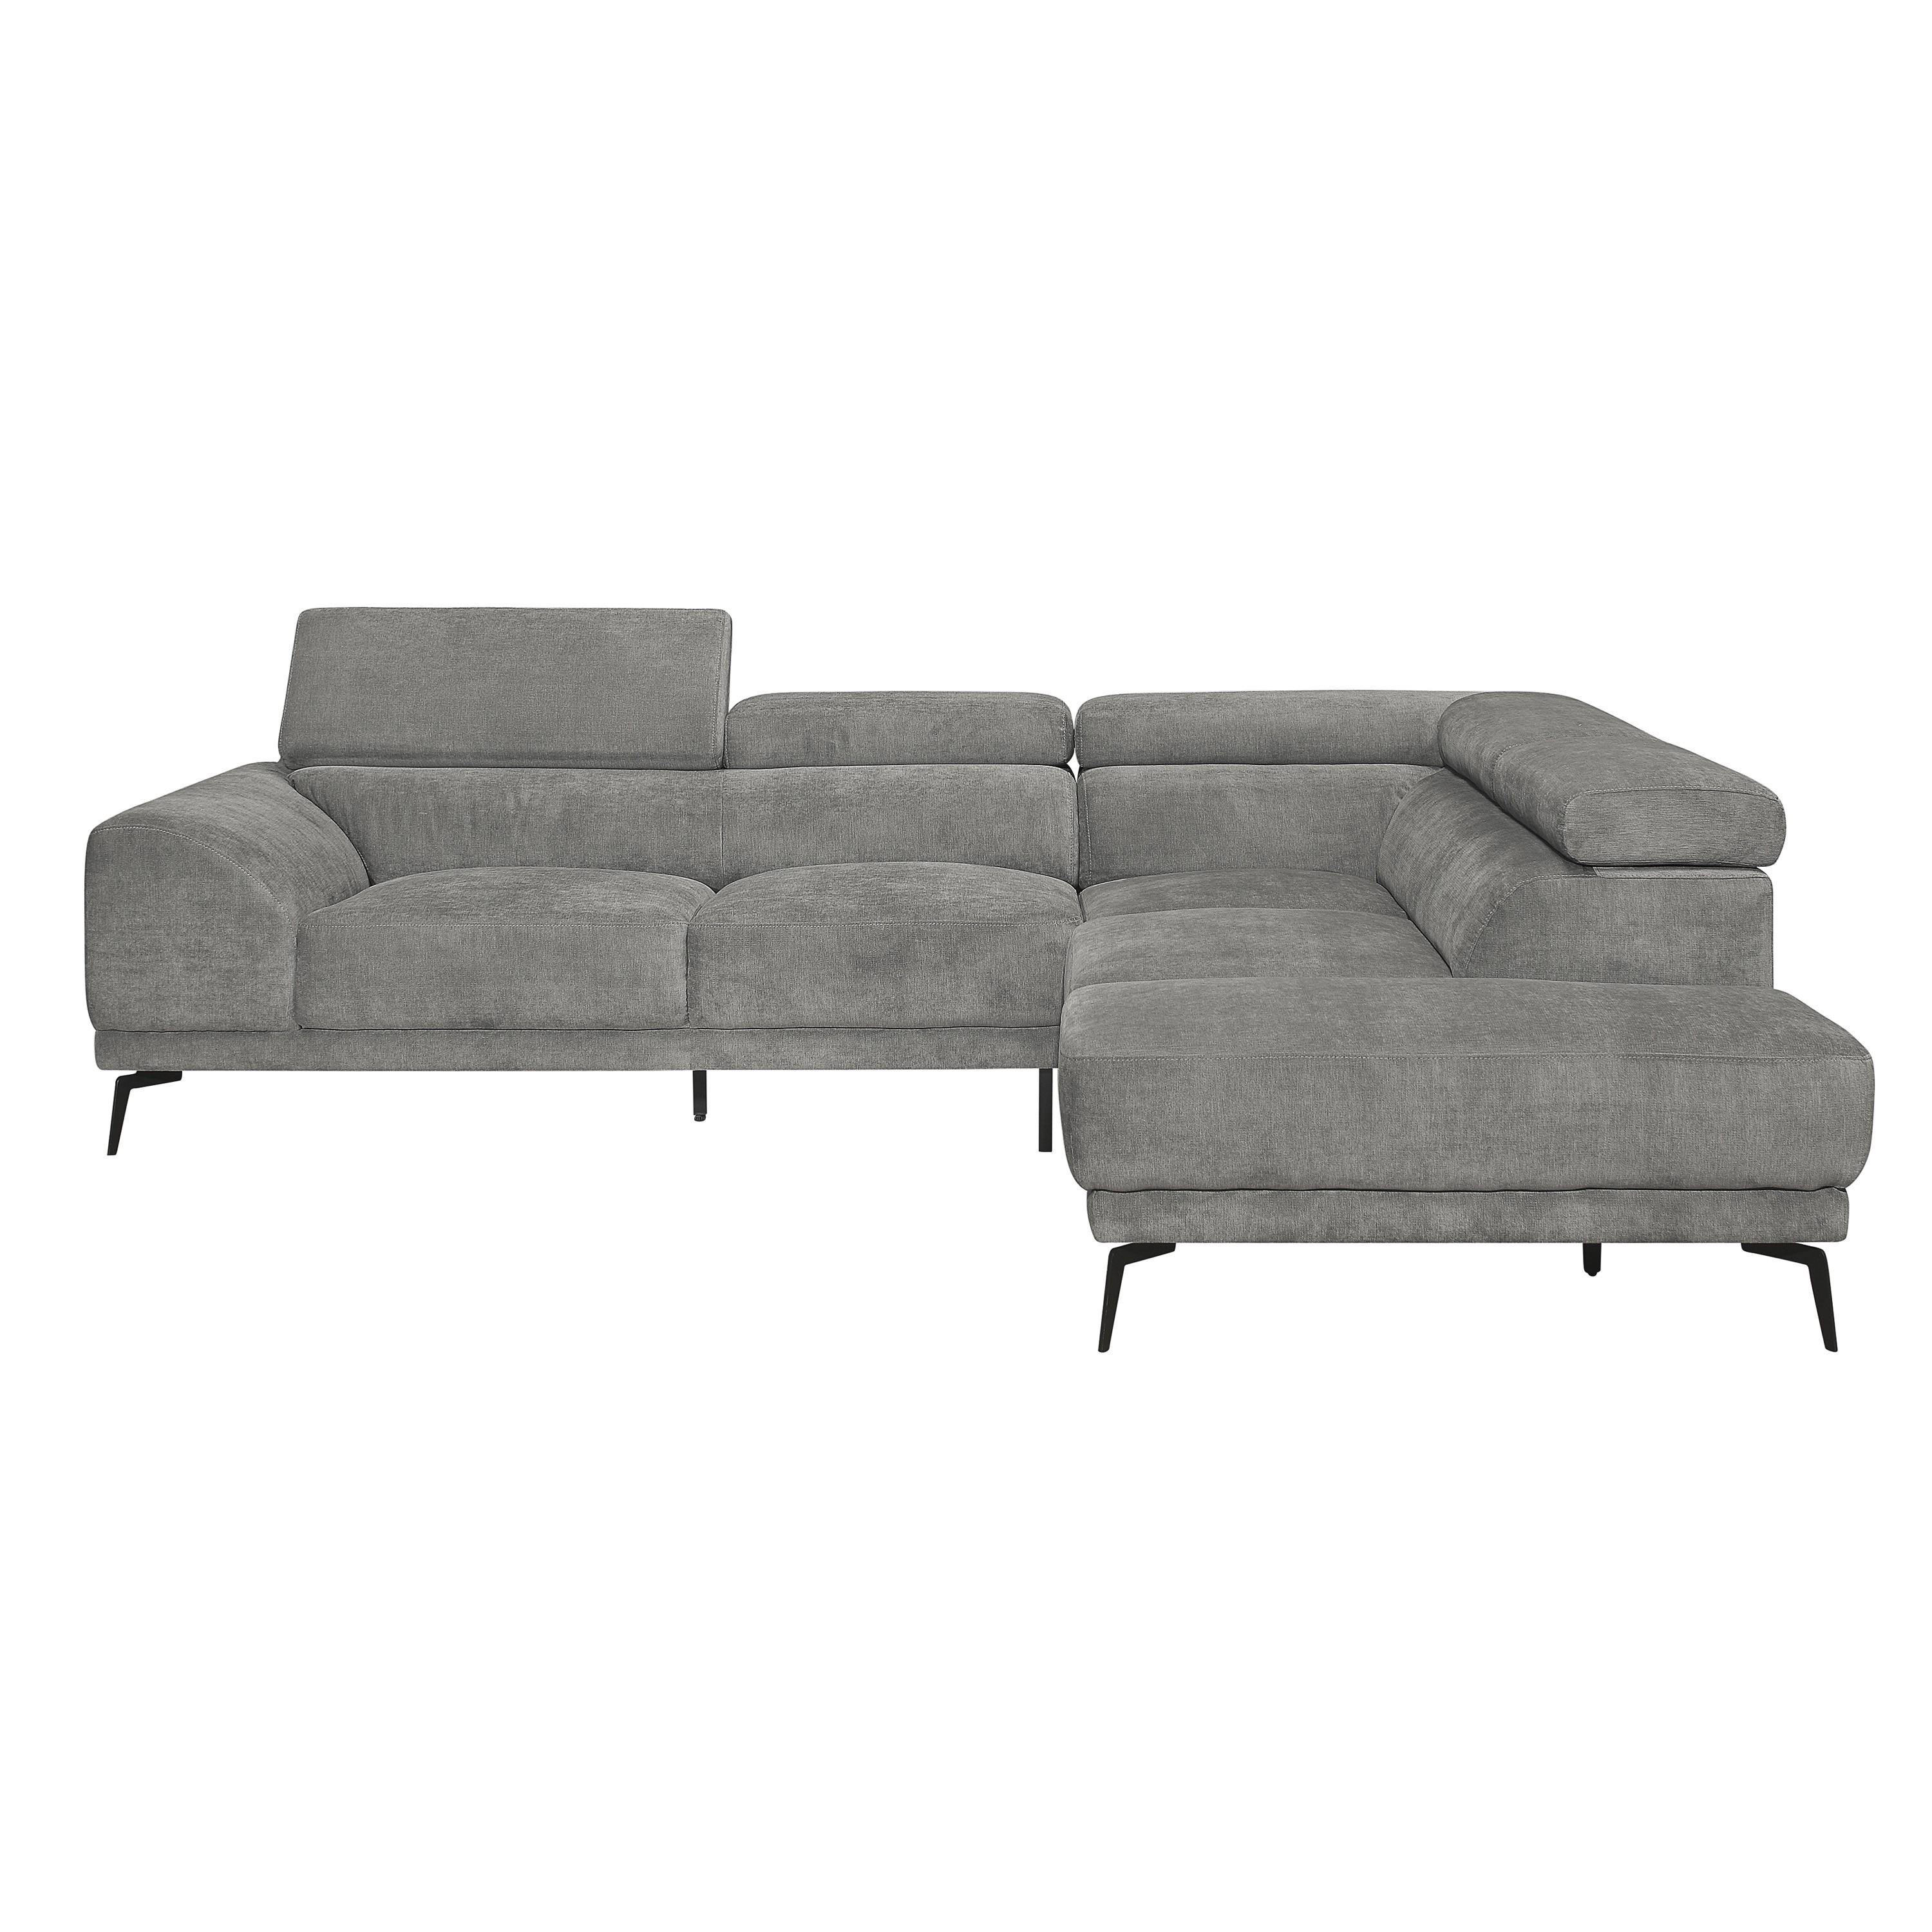 Modern Sectional Sofa 9409GRY*SC Medora 9409GRY*SC in Gray Polyester